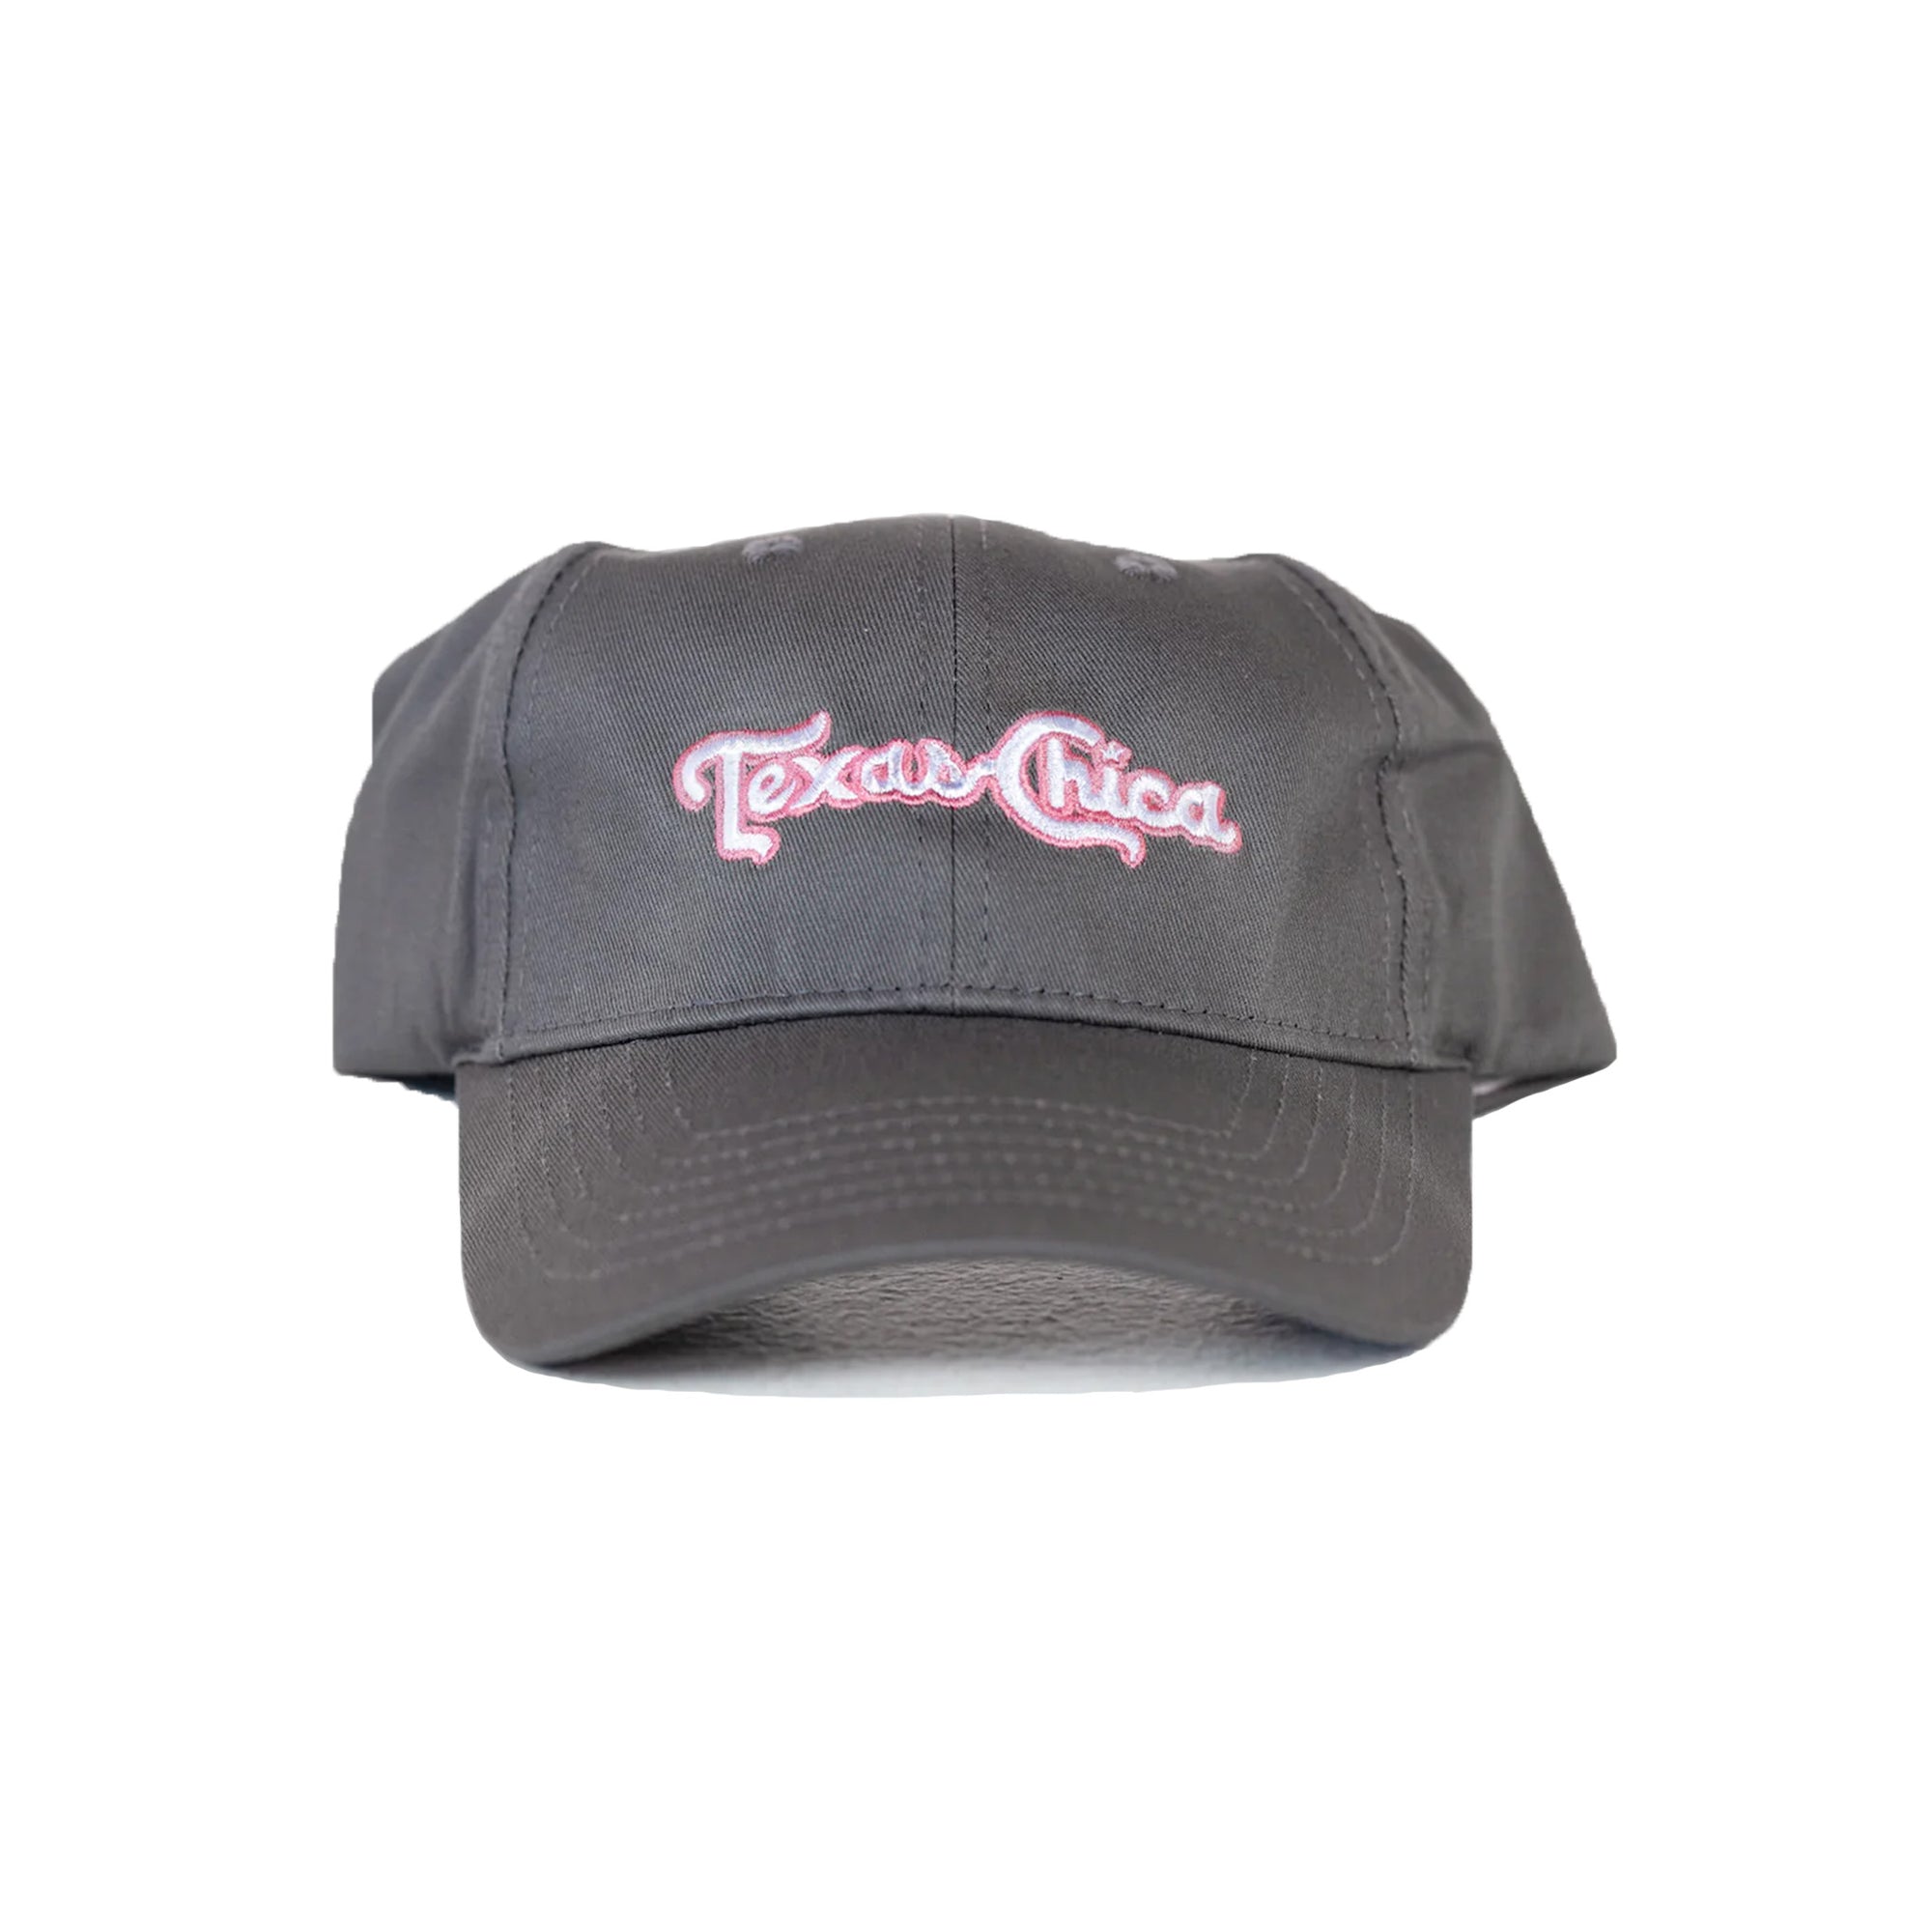 Texas Chica Gray Hat